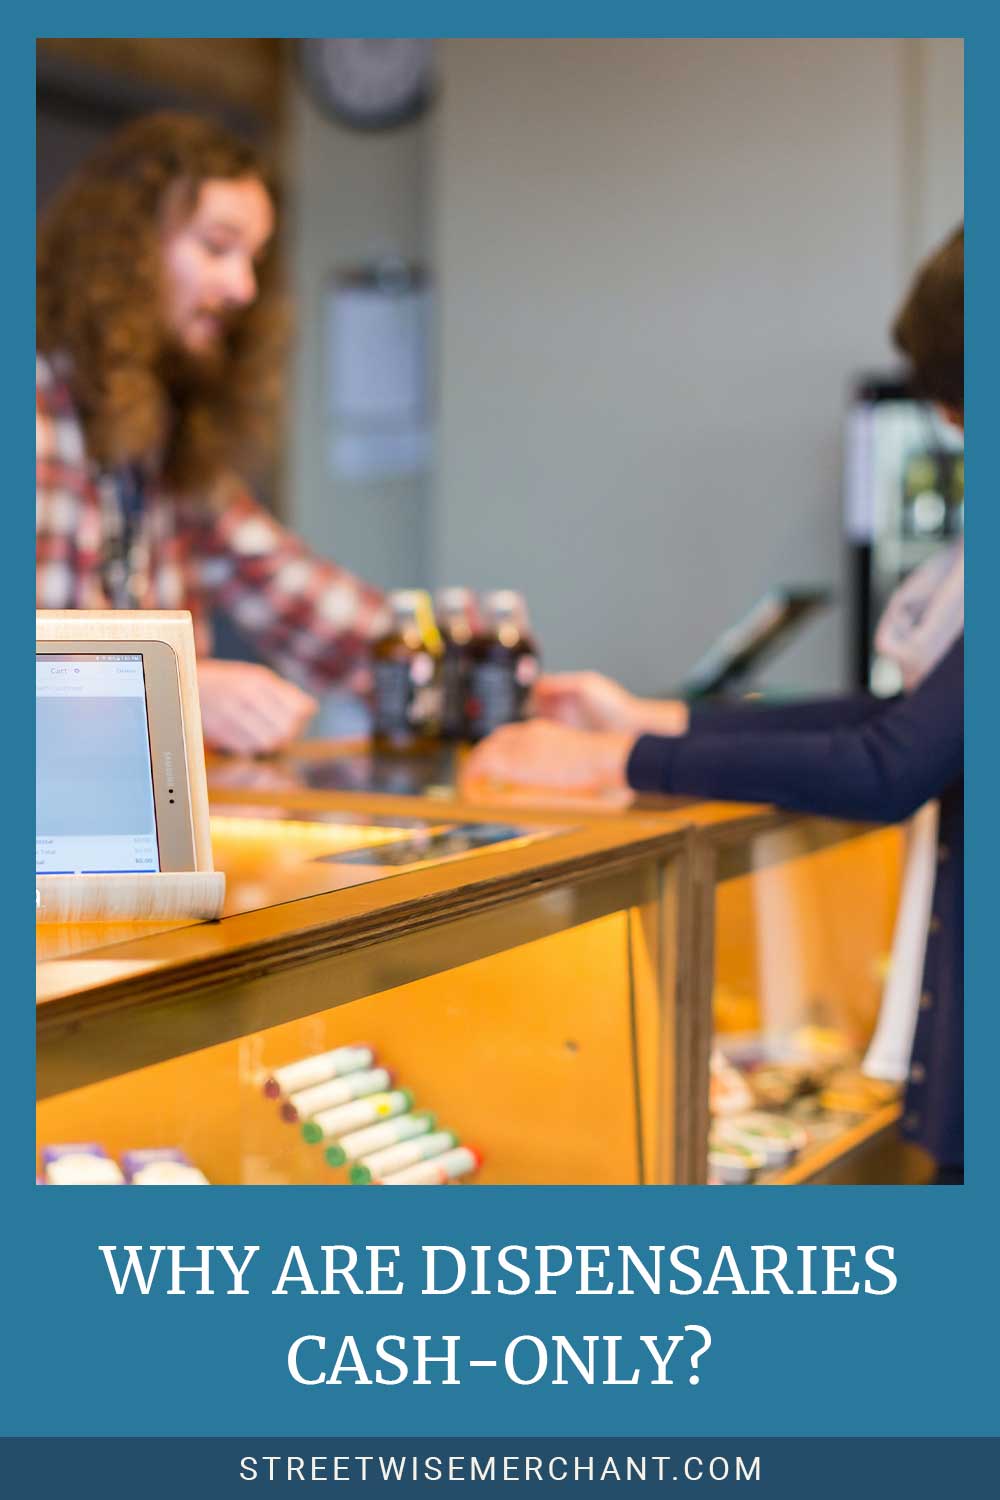 Transaction happening at the counter - Why Are dispensaries Cash-Only?